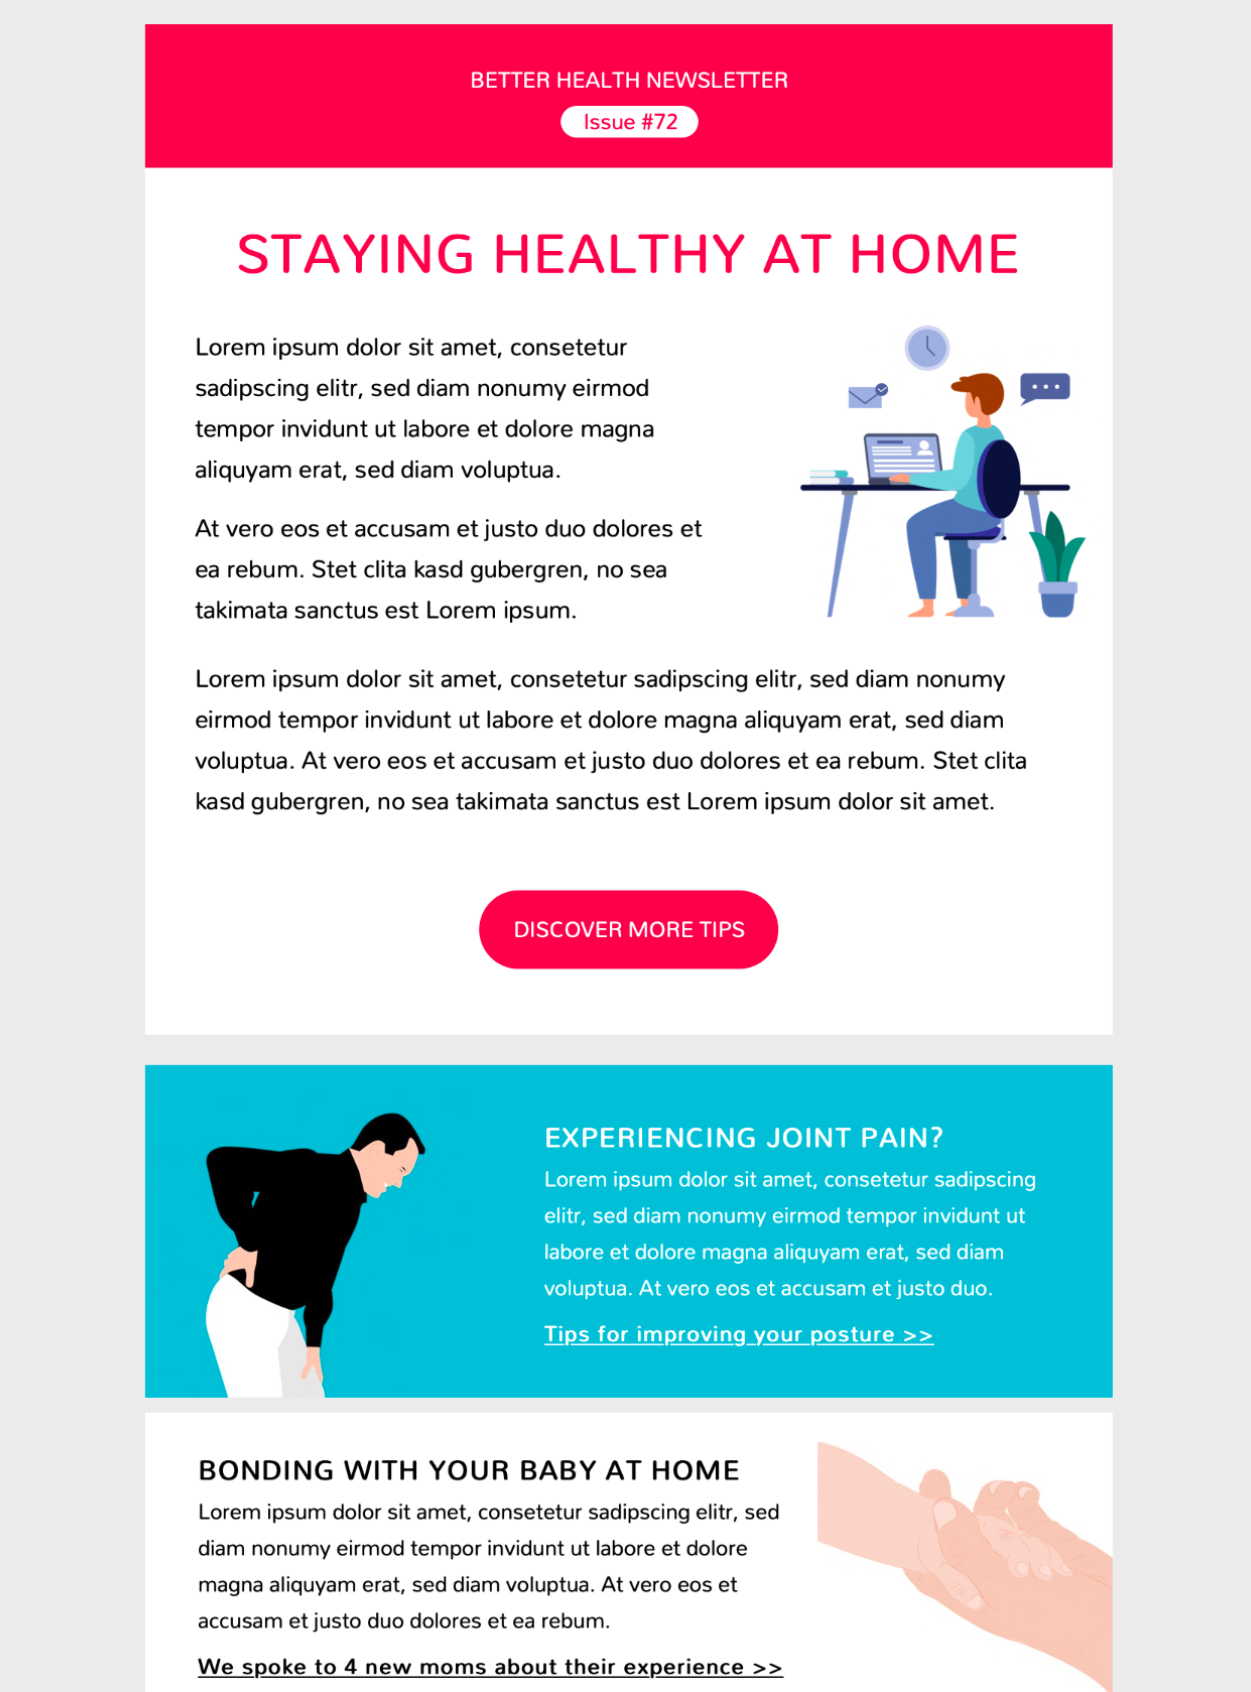 healthcare tips newsletter email template in Mail Designer 365